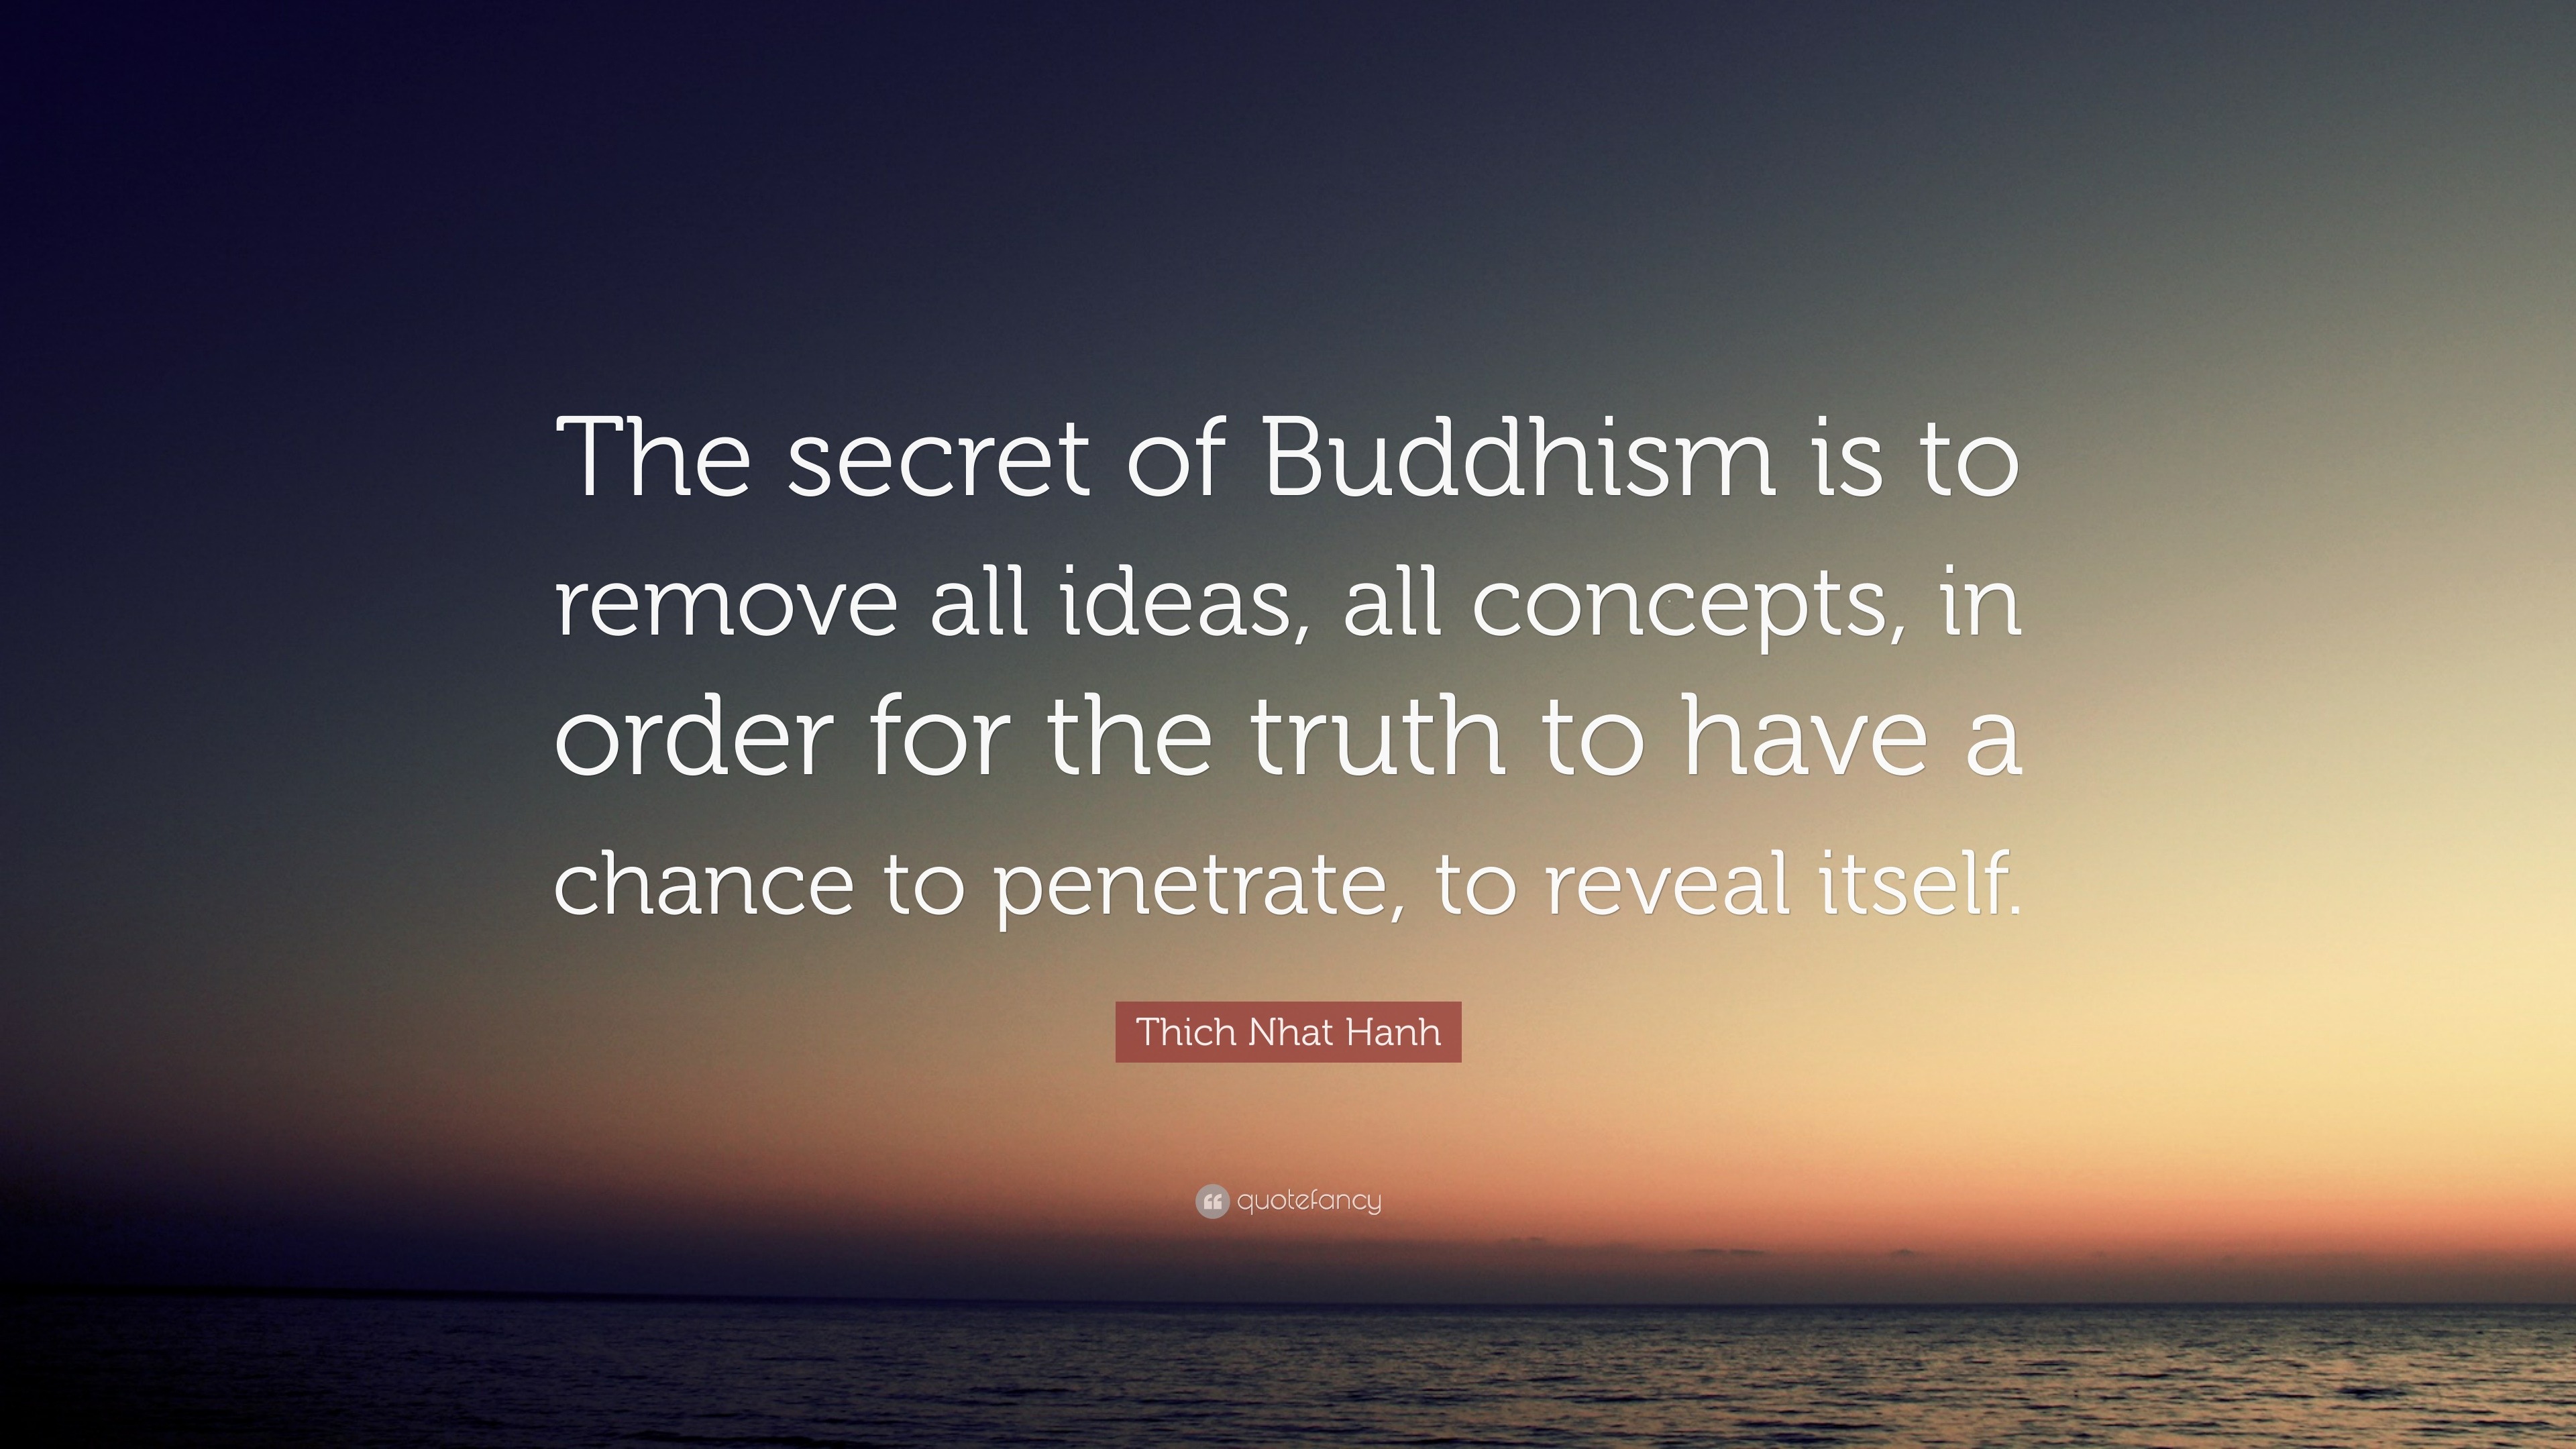 Thich Nhat Hanh Quote “The secret of Buddhism is to remove all ideas